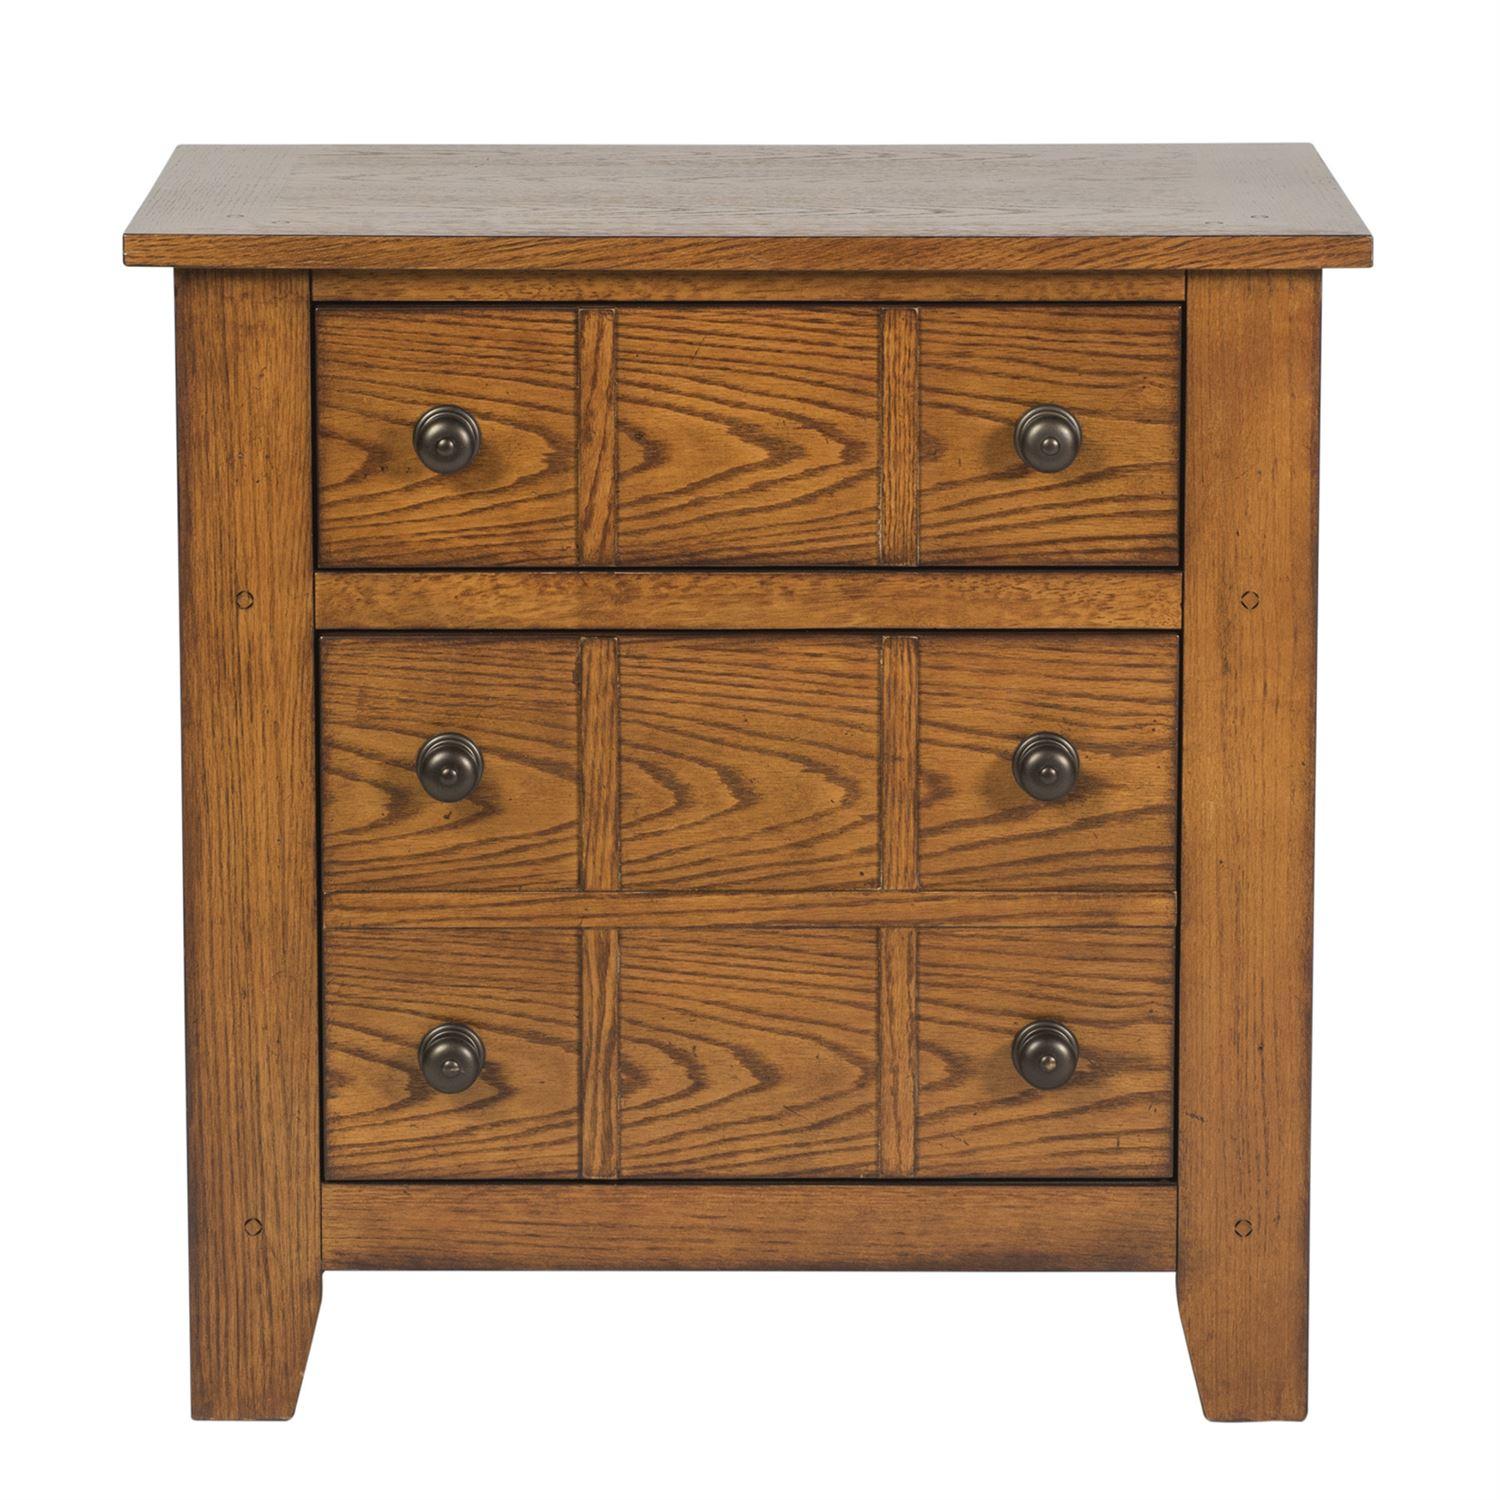 Traditional Nightstand Grandpas Cabin  (175-BR) Nightstand 175-BR61 in Oak, Brown Matte Lacquer